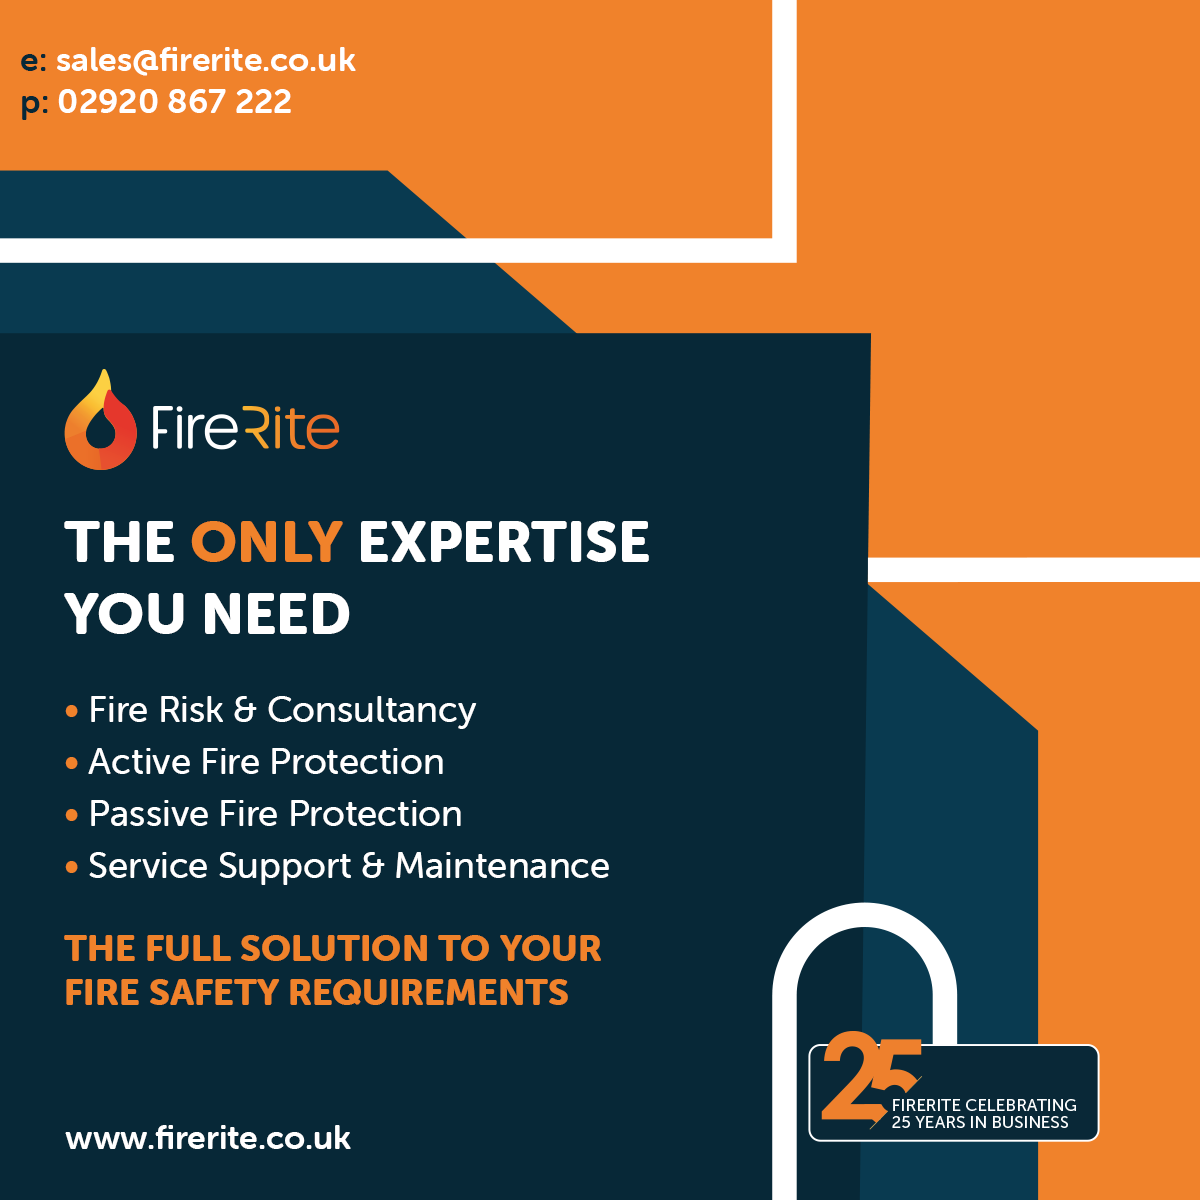 At FireRite we are the full solution to your fire safety needs.

✅ Fire Risk & Consultancy 
✅ Active Fire Protection 
✅ Passive Fire Protection 
✅ Service Support & Maintenance 

firerite.co.uk

#fireconsultants #passivefire #activefire #firerisk #firemaintenance